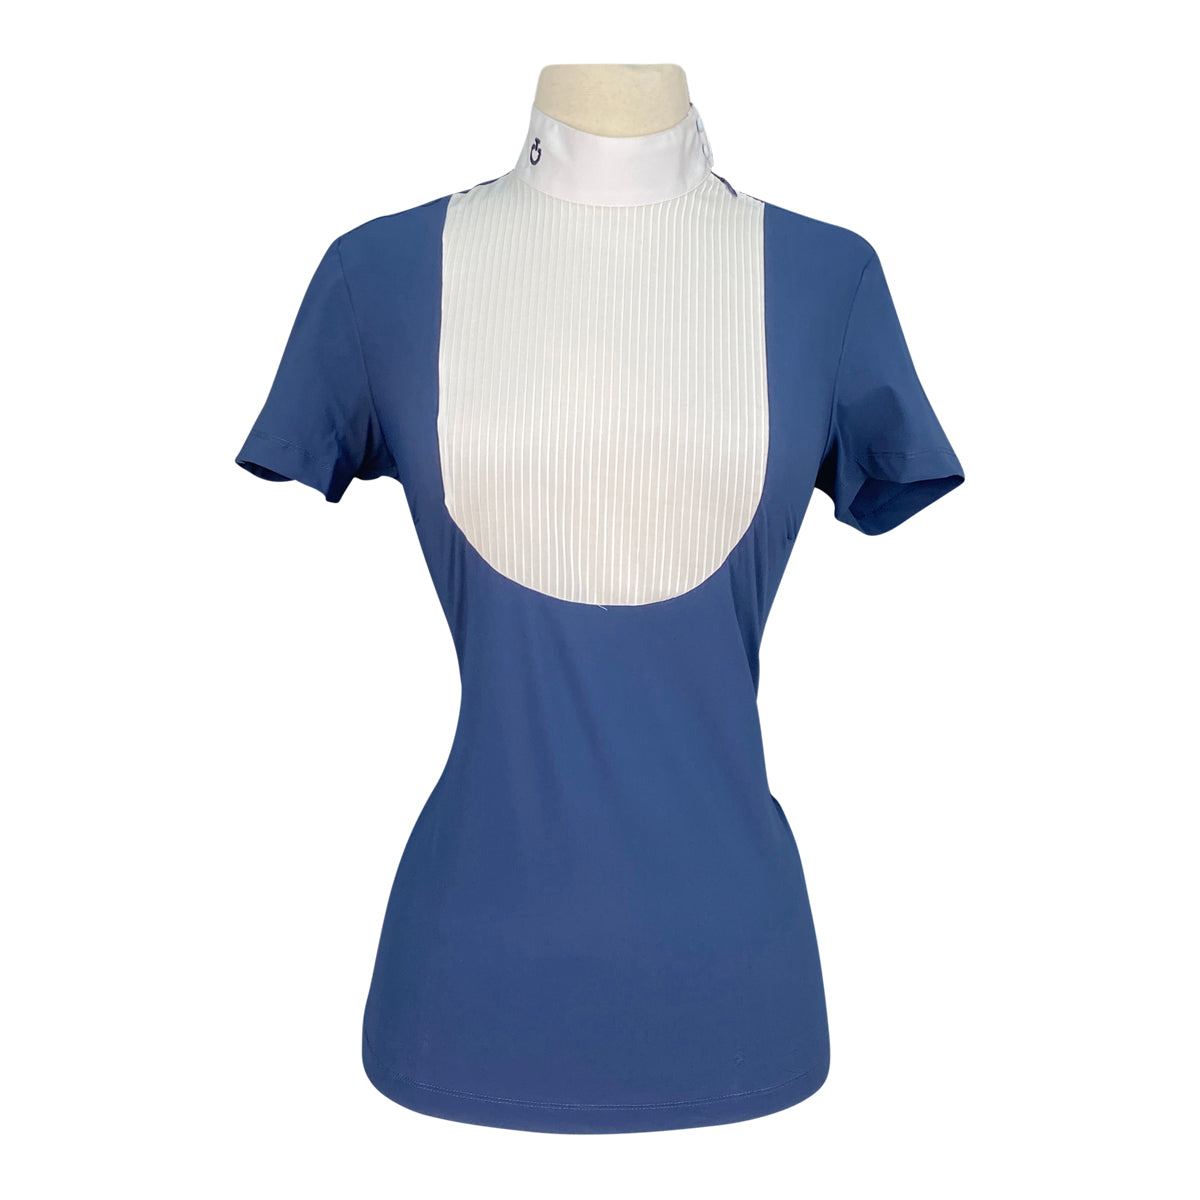 Cavalleria Toscana Jersey Competition Shirt w/Oval Pleated Bib in Atlantic Blue